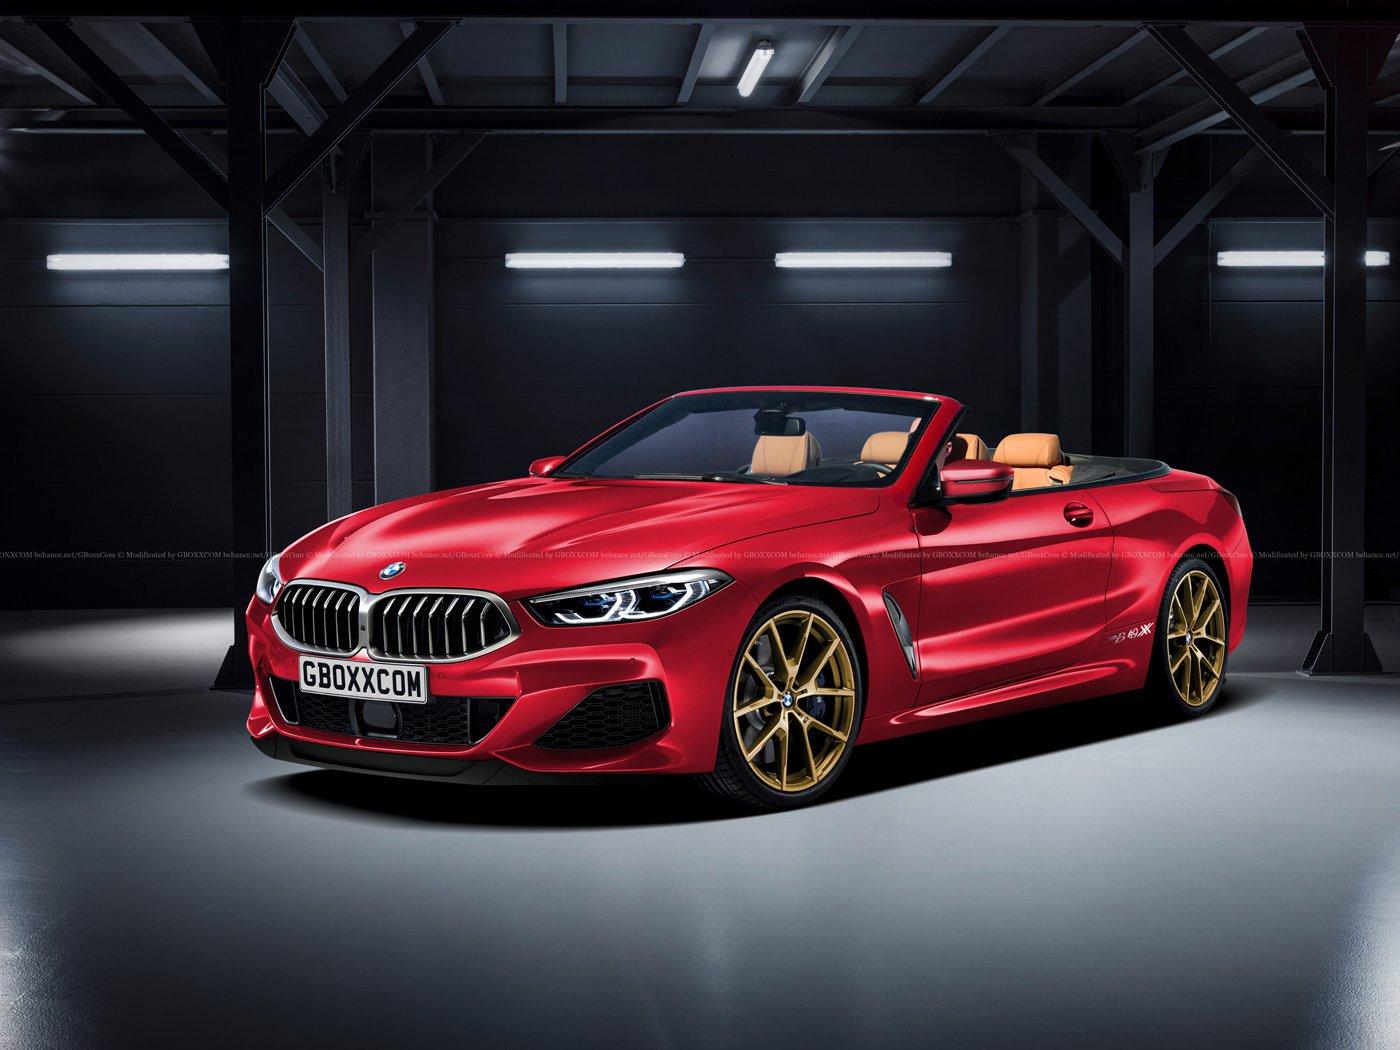 BMW 8 Series Rendered as Cabrio, Pickup, Gran Coupe and GTS